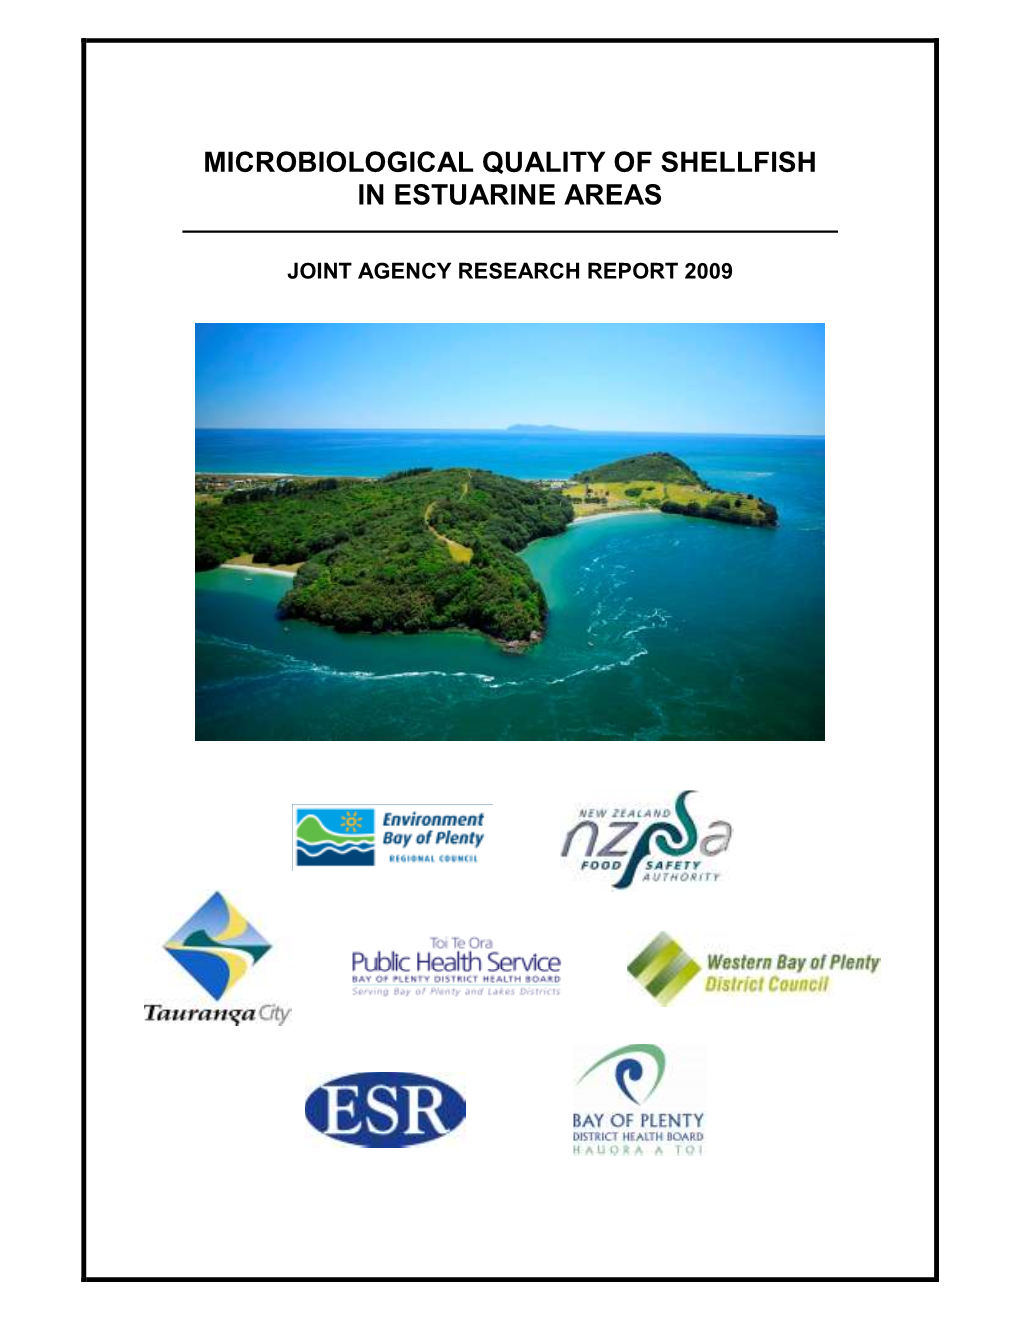 Microbiological Quality of Shellfish in Estuarine Areas